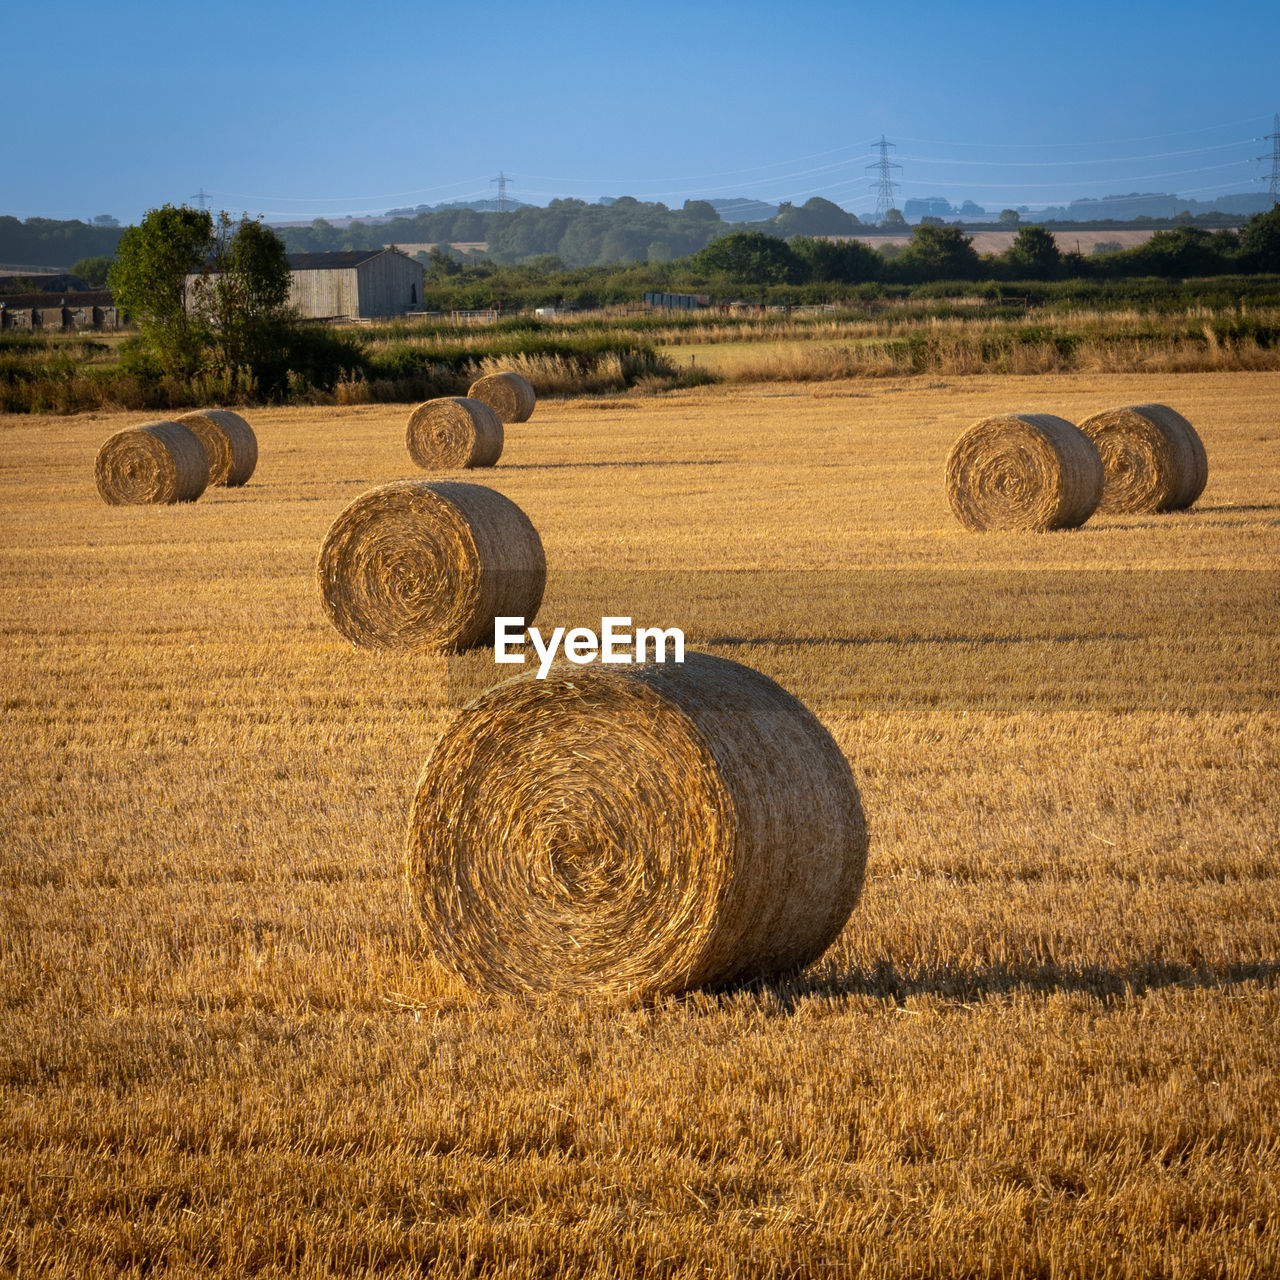 bale, hay, agriculture, landscape, field, rural scene, farm, land, plant, harvesting, environment, sky, crop, straw, nature, rolled up, circle, cereal plant, geometric shape, scenics - nature, soil, shape, tranquility, tranquil scene, beauty in nature, no people, haystack, sunlight, summer, rural area, gold, outdoors, harvest, day, grass, tree, idyllic, corn, food, food and drink